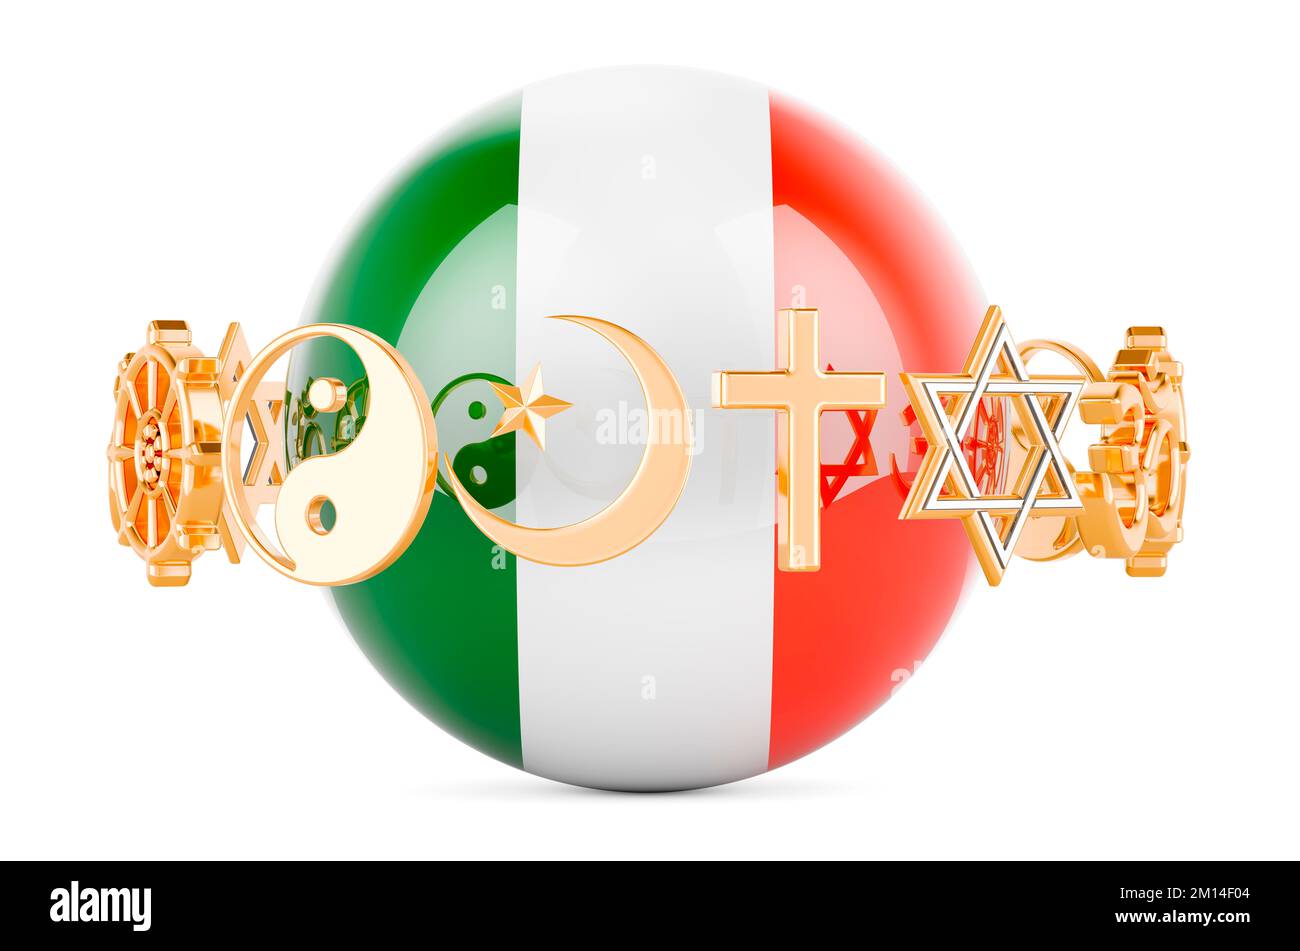 Irish flag painted on sphere with religions symbols around, 3D rendering isolated on white background Stock Photo